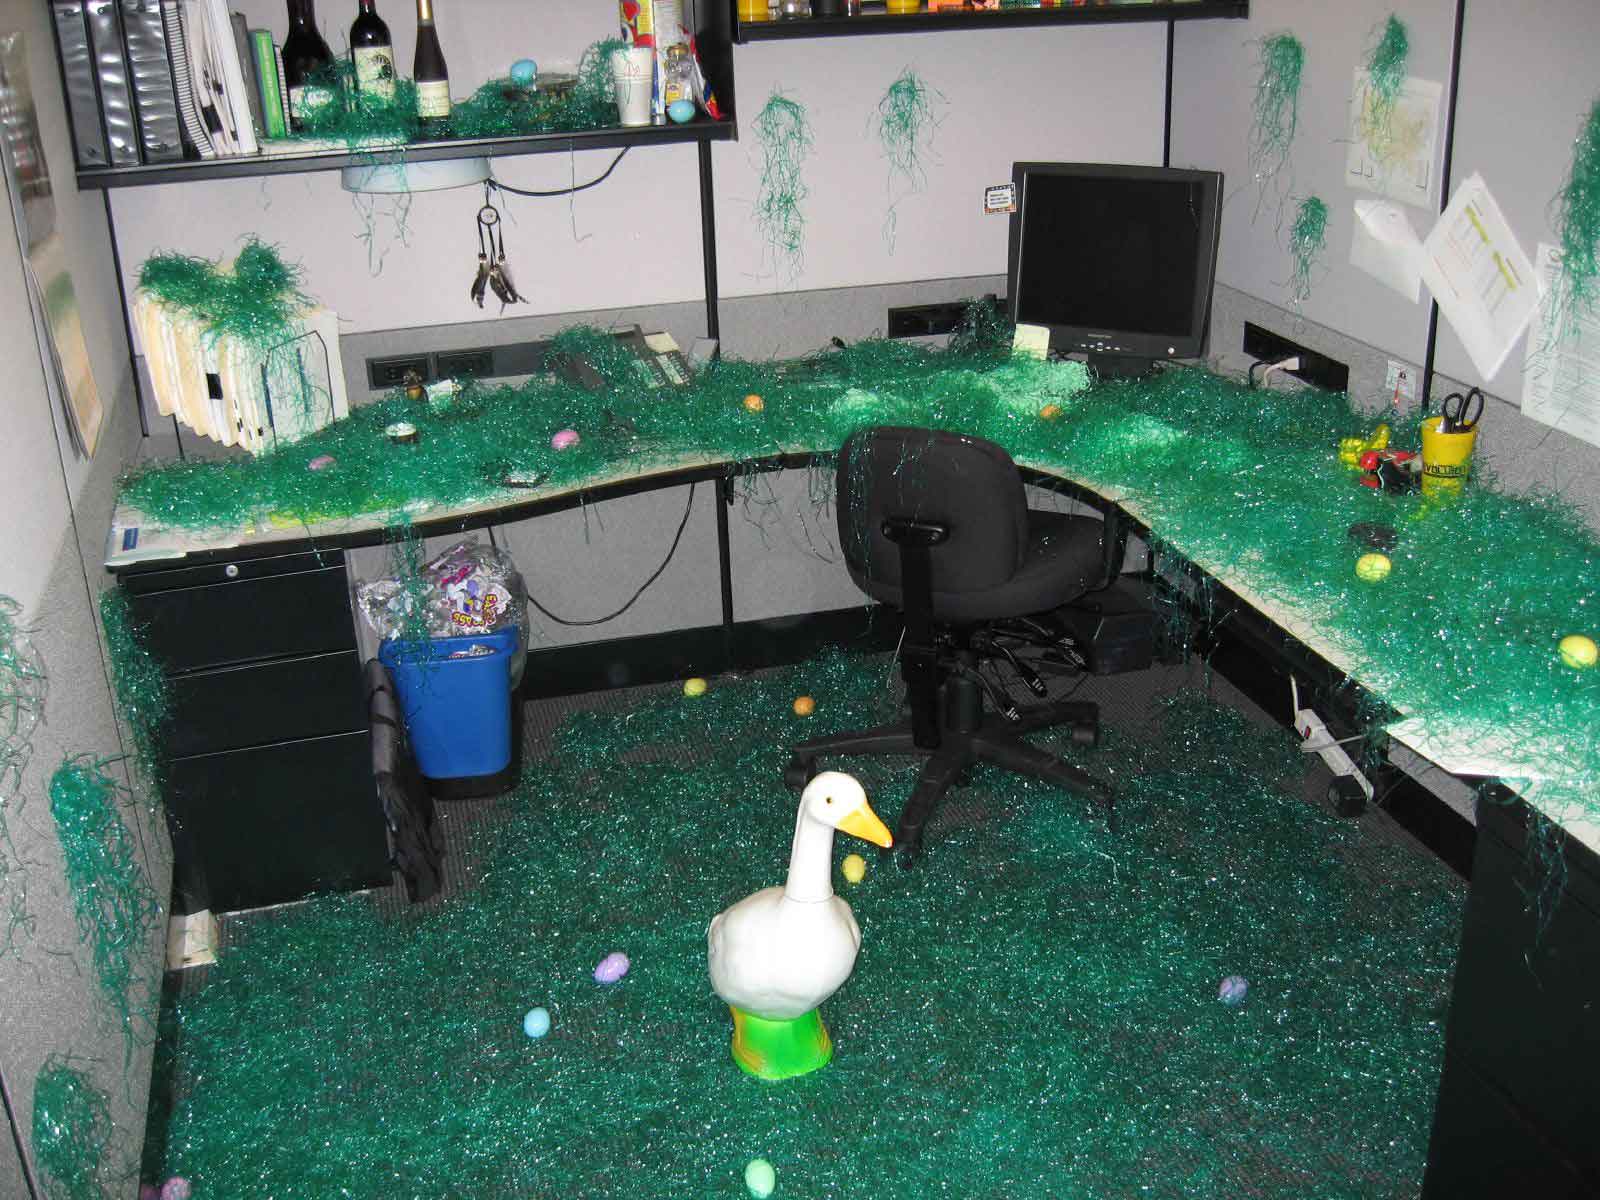 10 Office Cubicle Pranks That Will Drive Your Coworkers Nuts